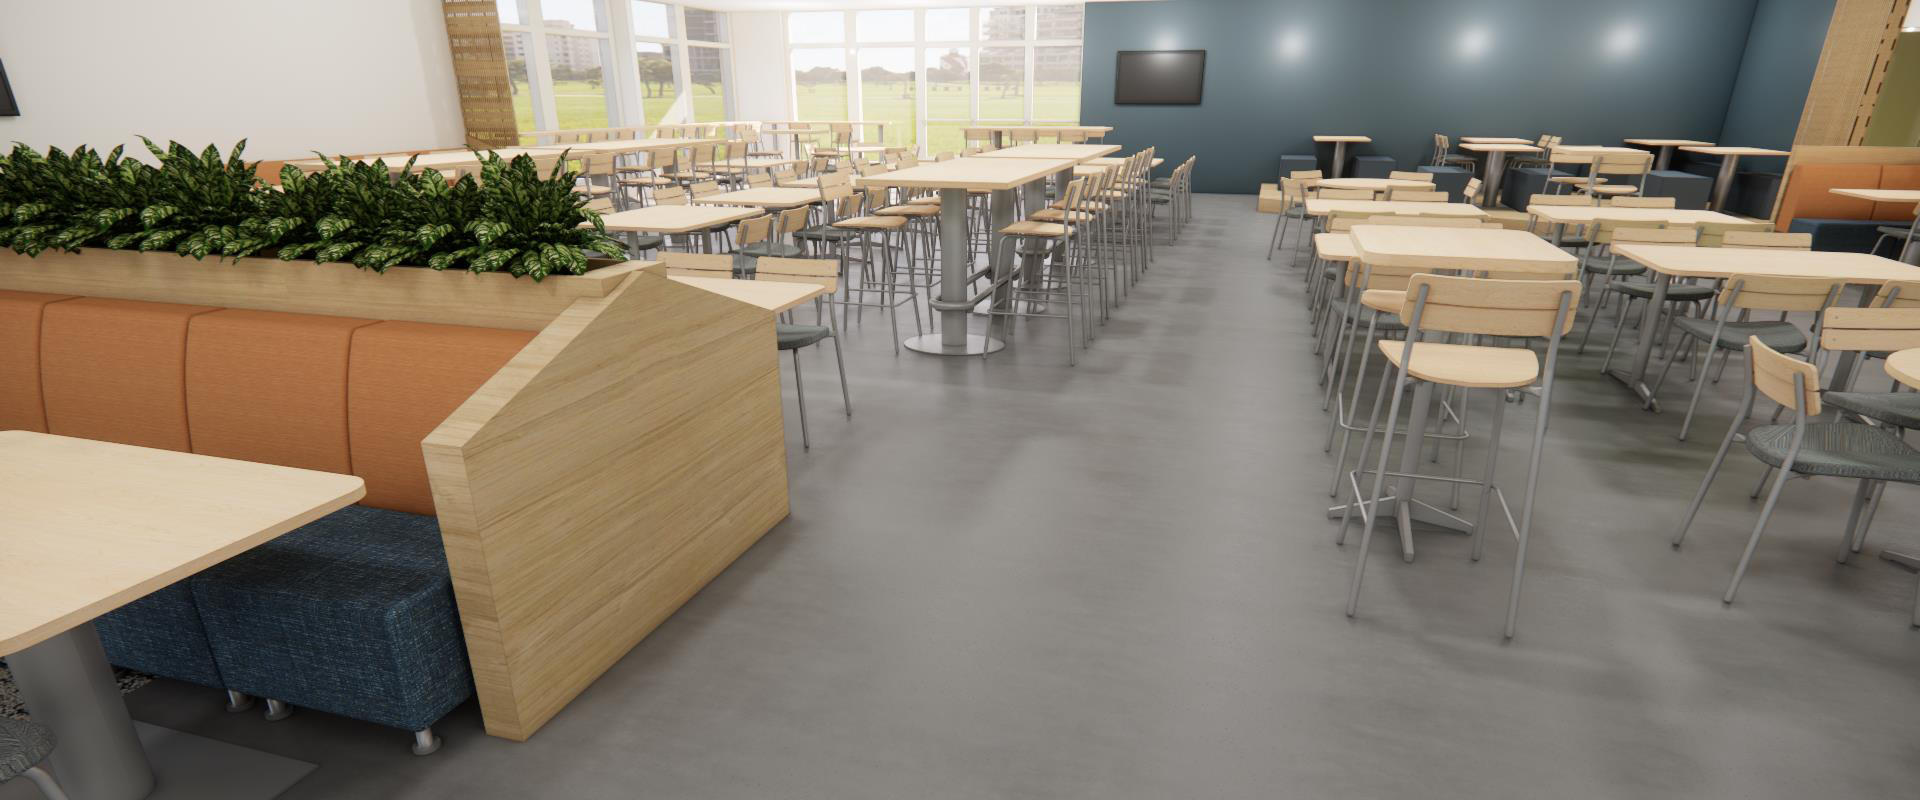 3D rendering of furniture and finishes in the Tully's renovation